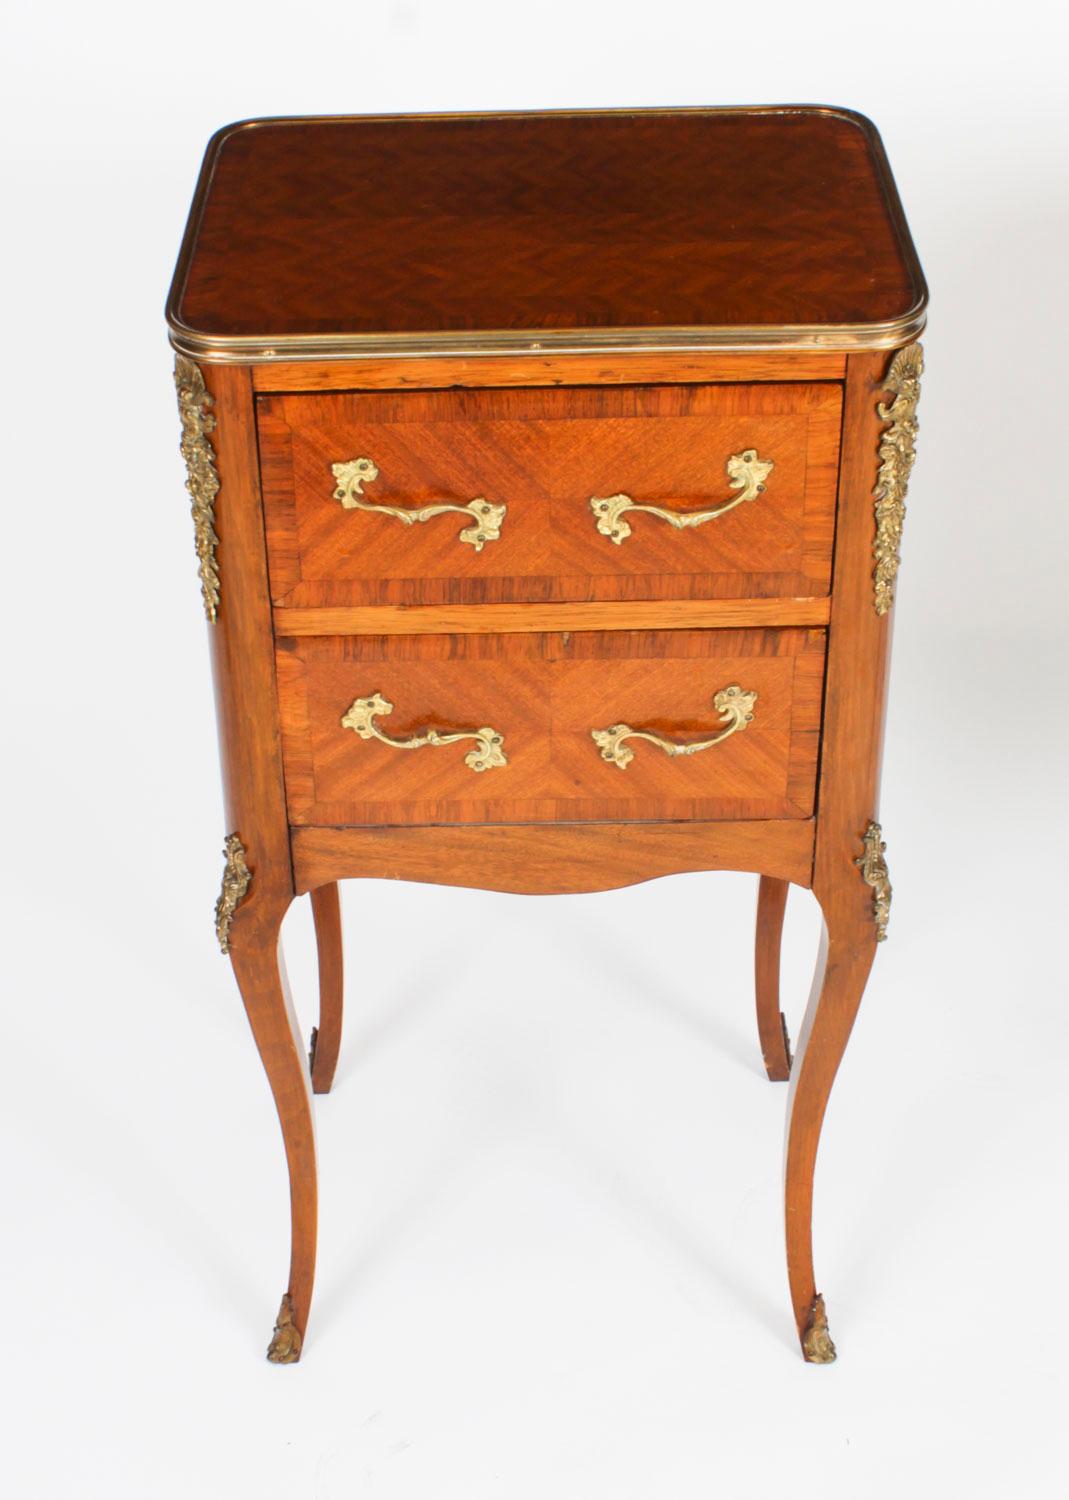 Antique Pair French Bois de Violette Parquetry Bedside Cabinets 19th Century In Good Condition For Sale In London, GB